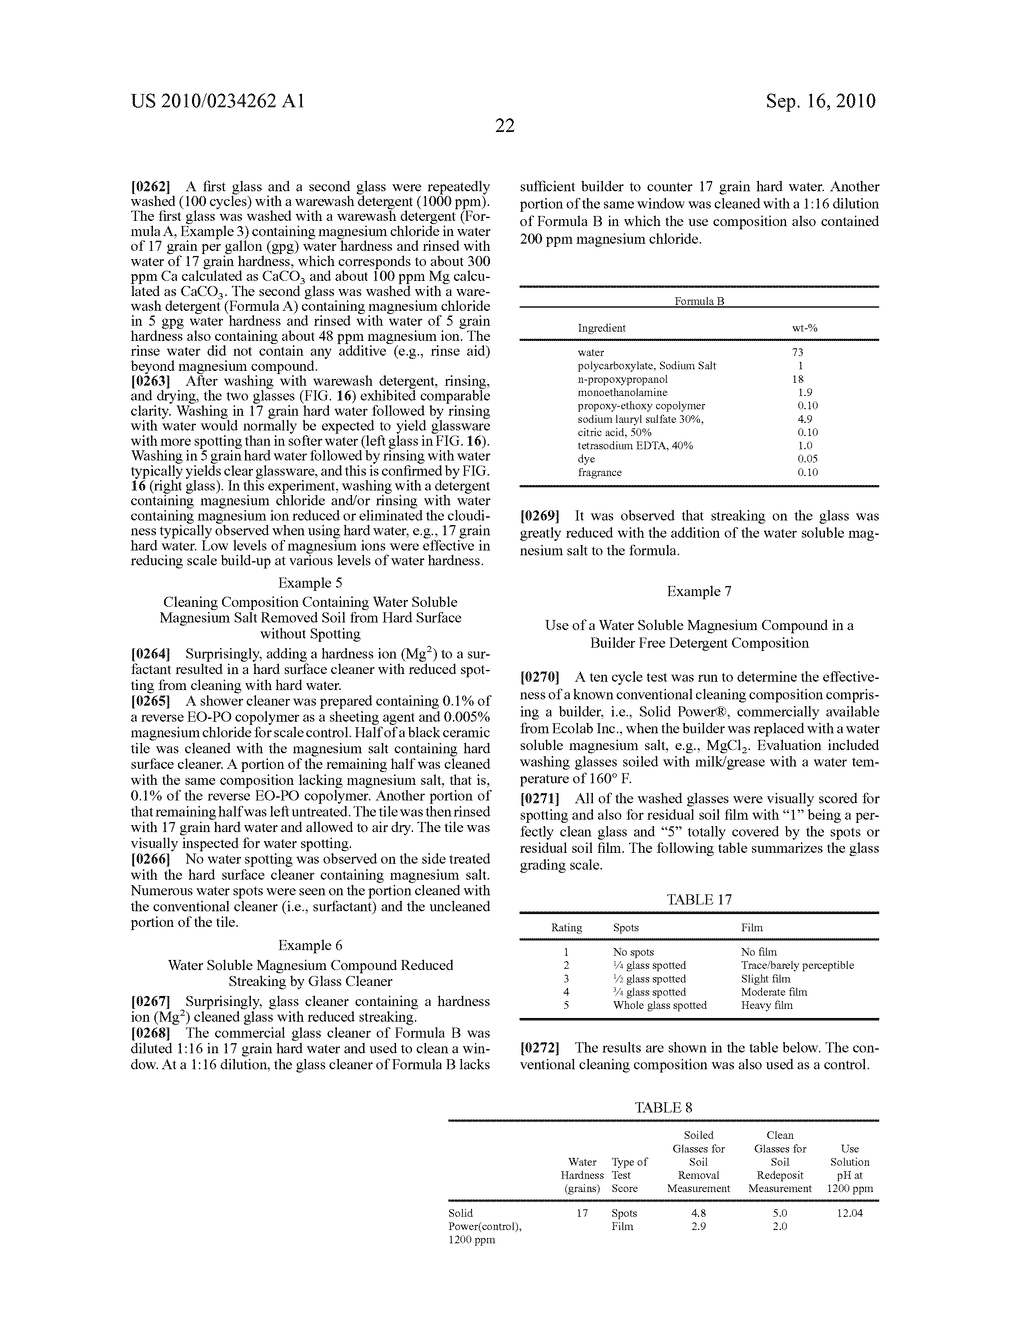 CLEANING COMPOSITIONS CONTAINING WATER SOLUBLE MAGNESIUM COMPOUNDS AND METHODS OF USING THEM - diagram, schematic, and image 39